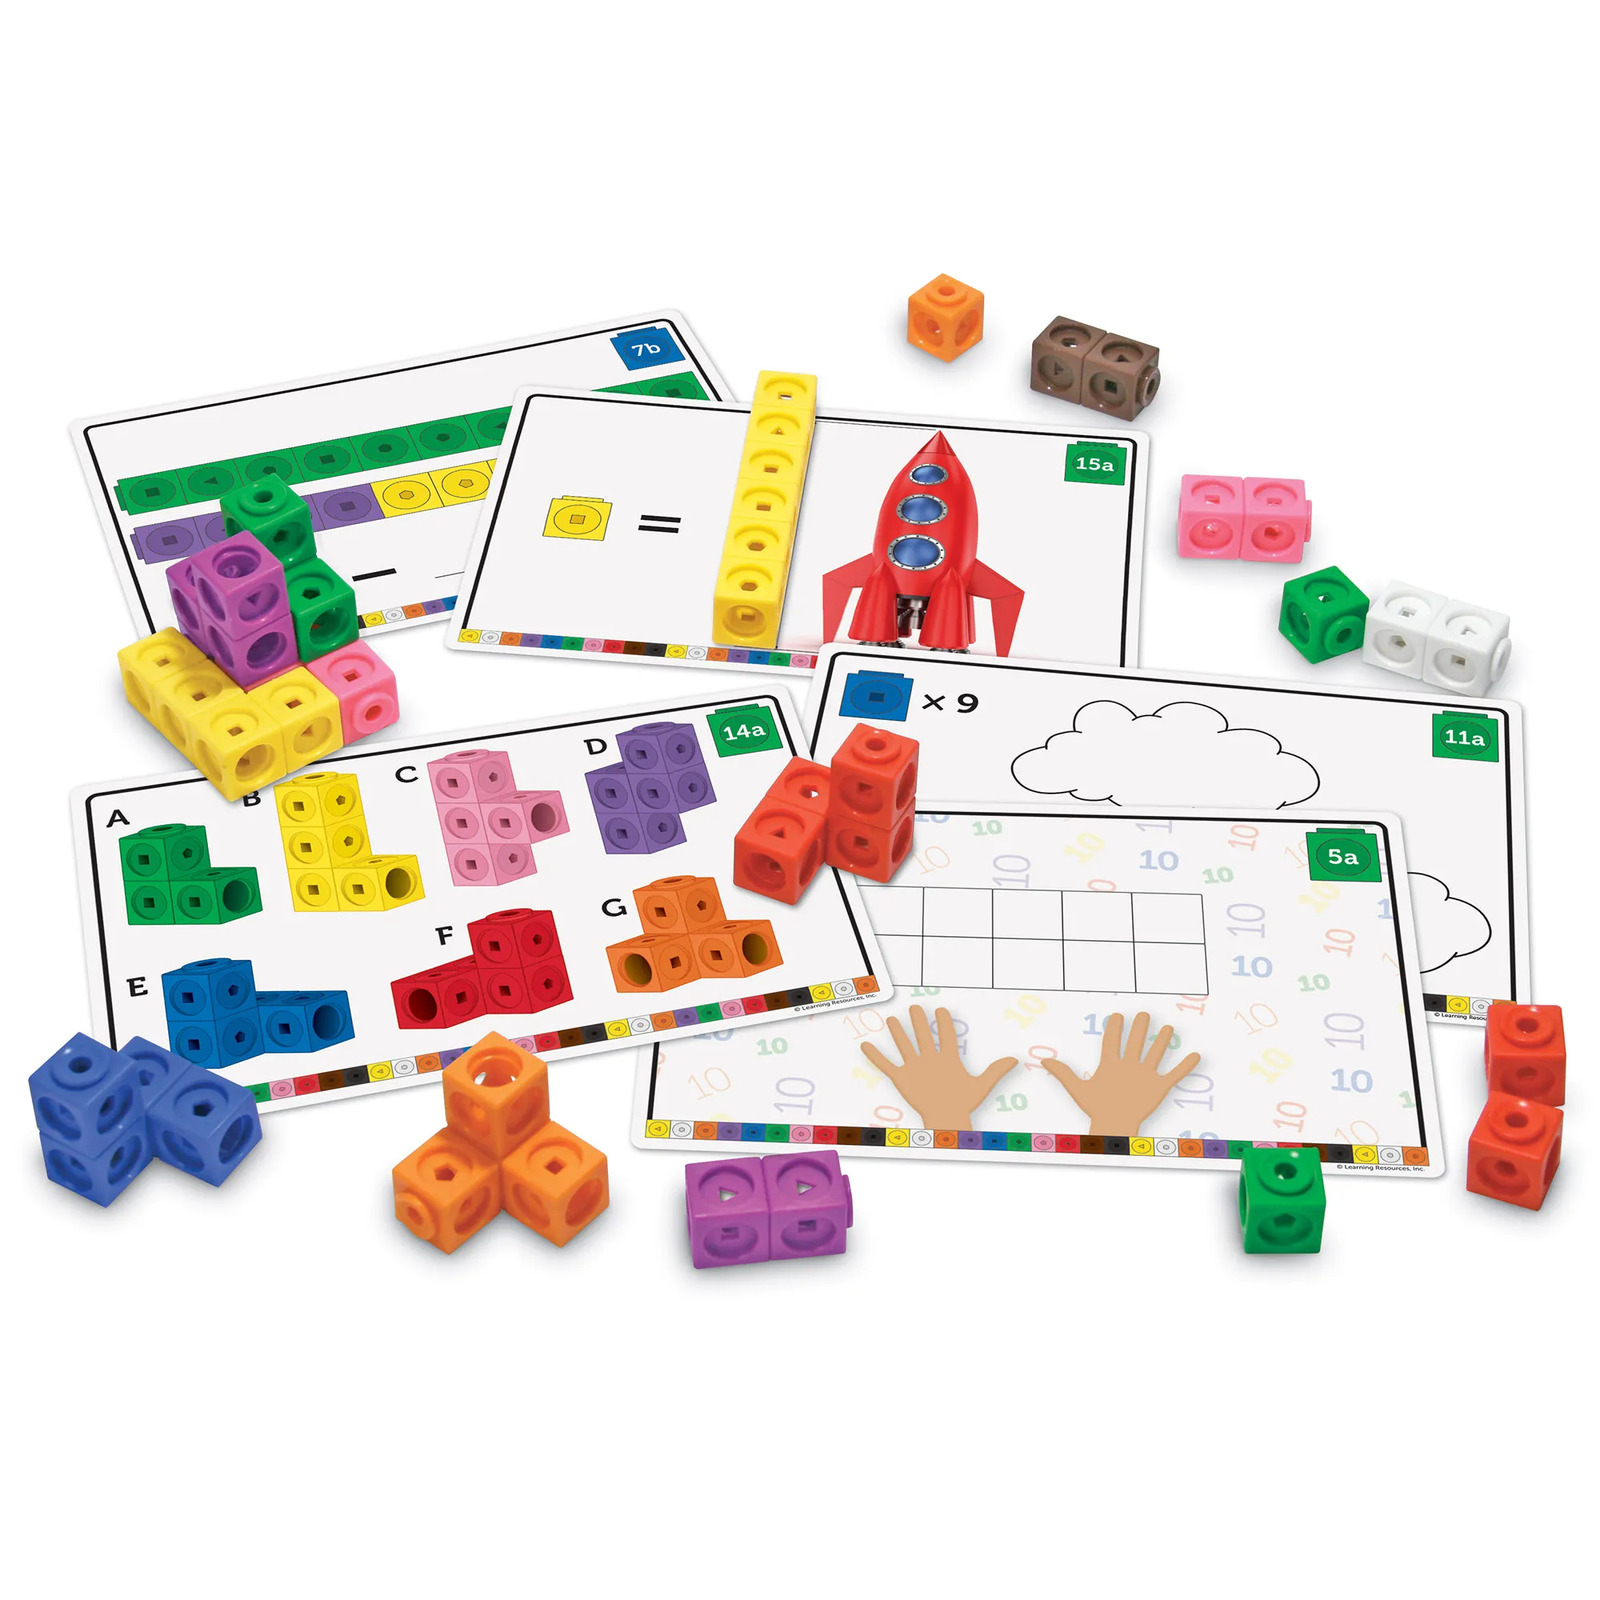 Hand2Mind Numberblocks Puzzle Set 3-Pack, Counting, Addition & Subtraction,  Sequencing